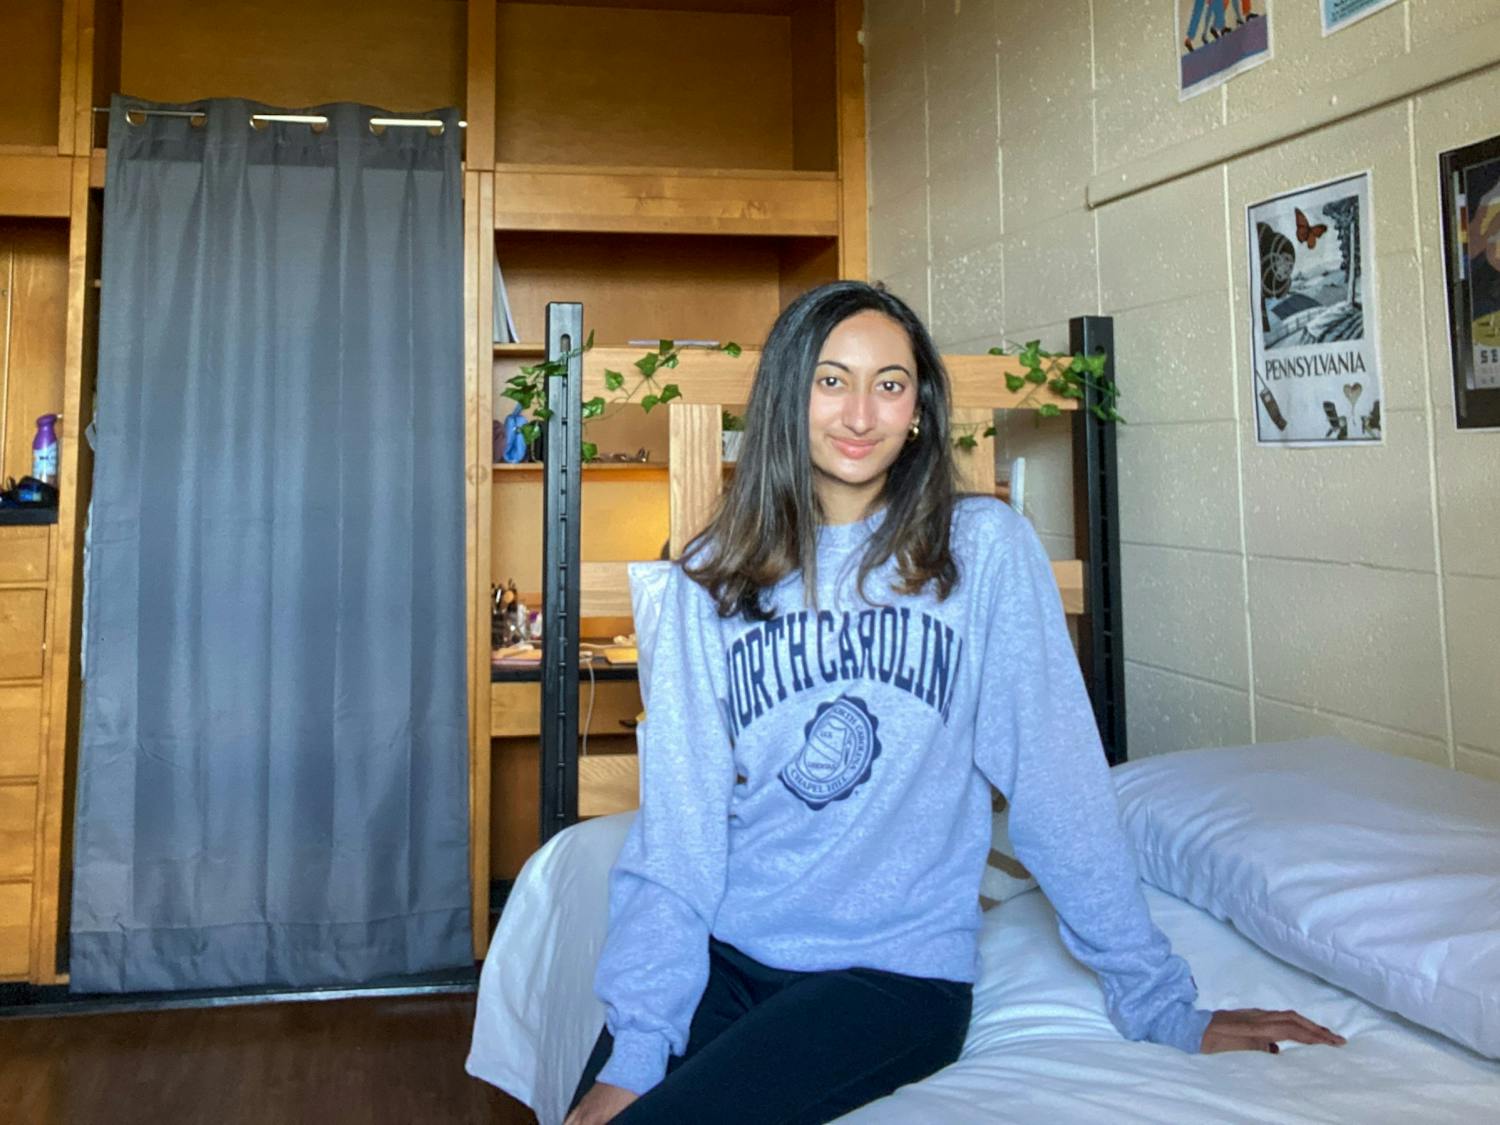 Rashika Rahman, a first-year at UNC, discussed what she thinks about drinking culture on campus at UNC as a minority student. Rahman poses for a virtual portrait from her dorm room on Thursday, Apr. 1, 2021.